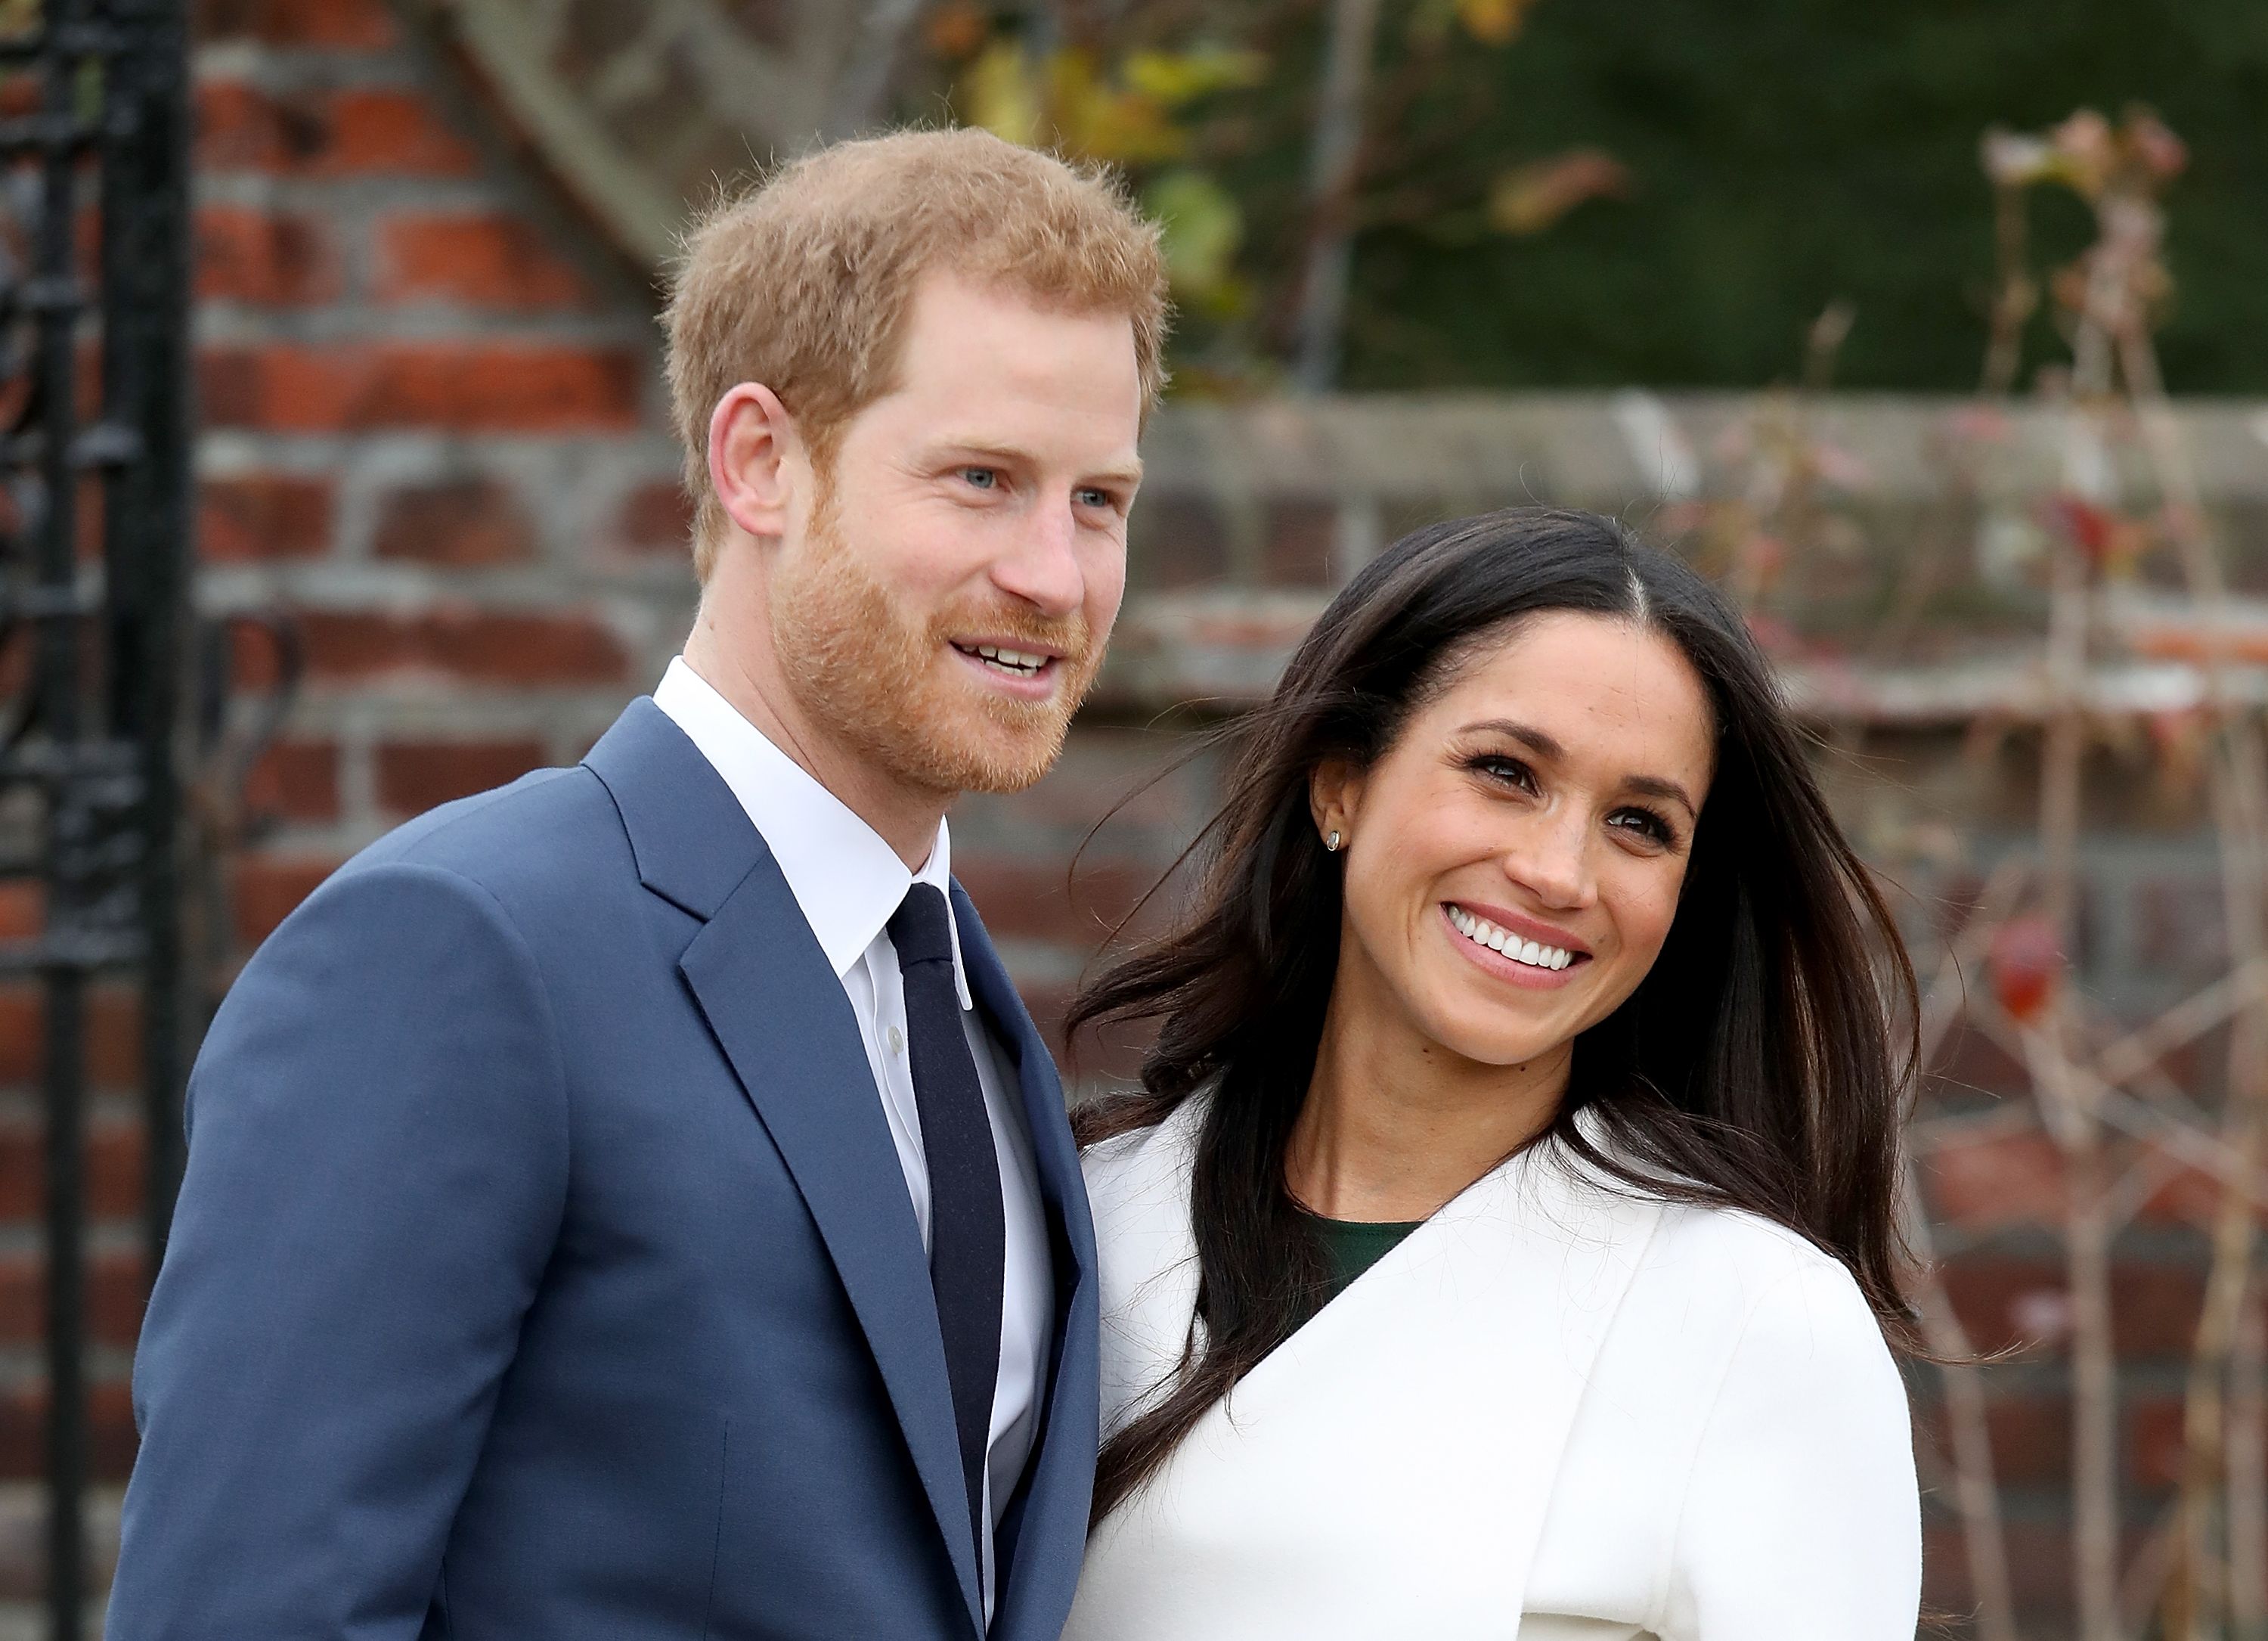 Prince Harry and Meghan Markle at an official photocall to announce their engagement at Kensington Palace on November 27, 2017 | Photo: Getty Images